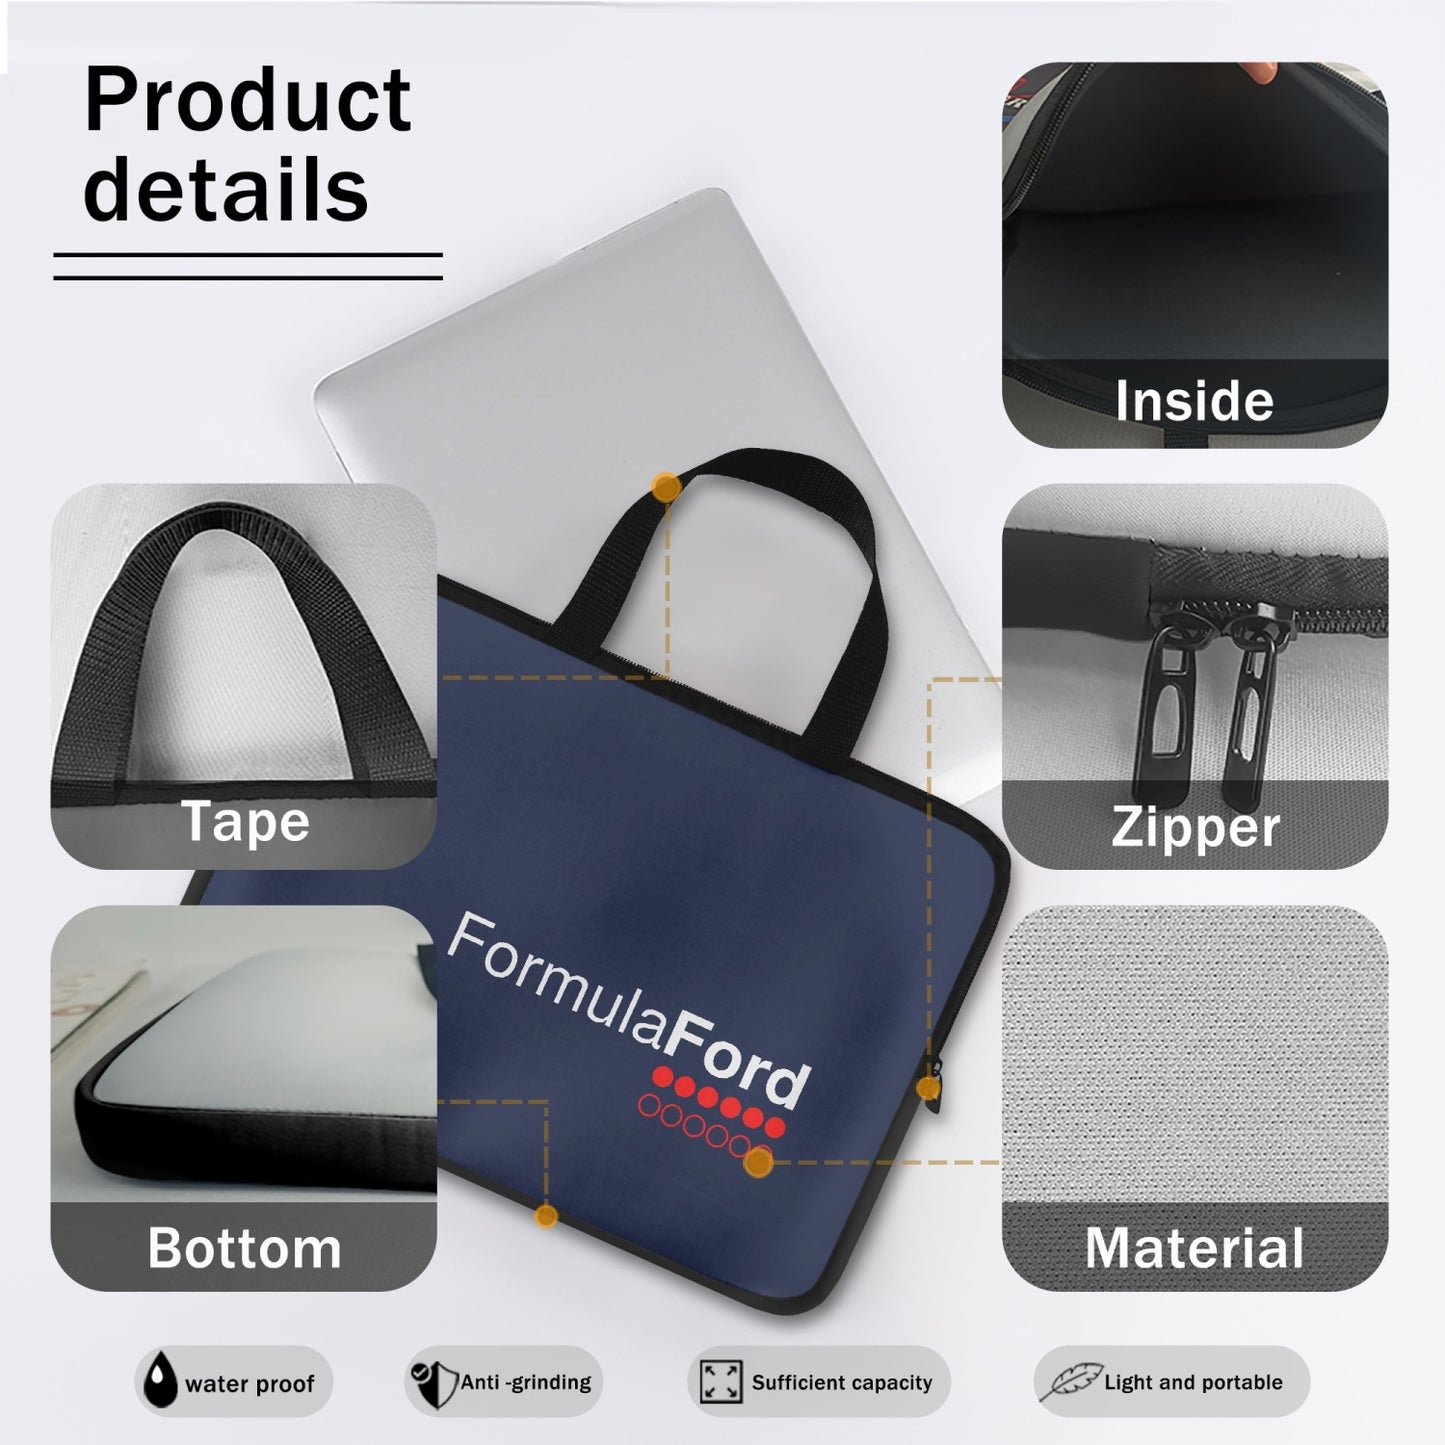 FORMULA FORD Official Waterproof Laptop Sleeve - Navy - 5 SIZES